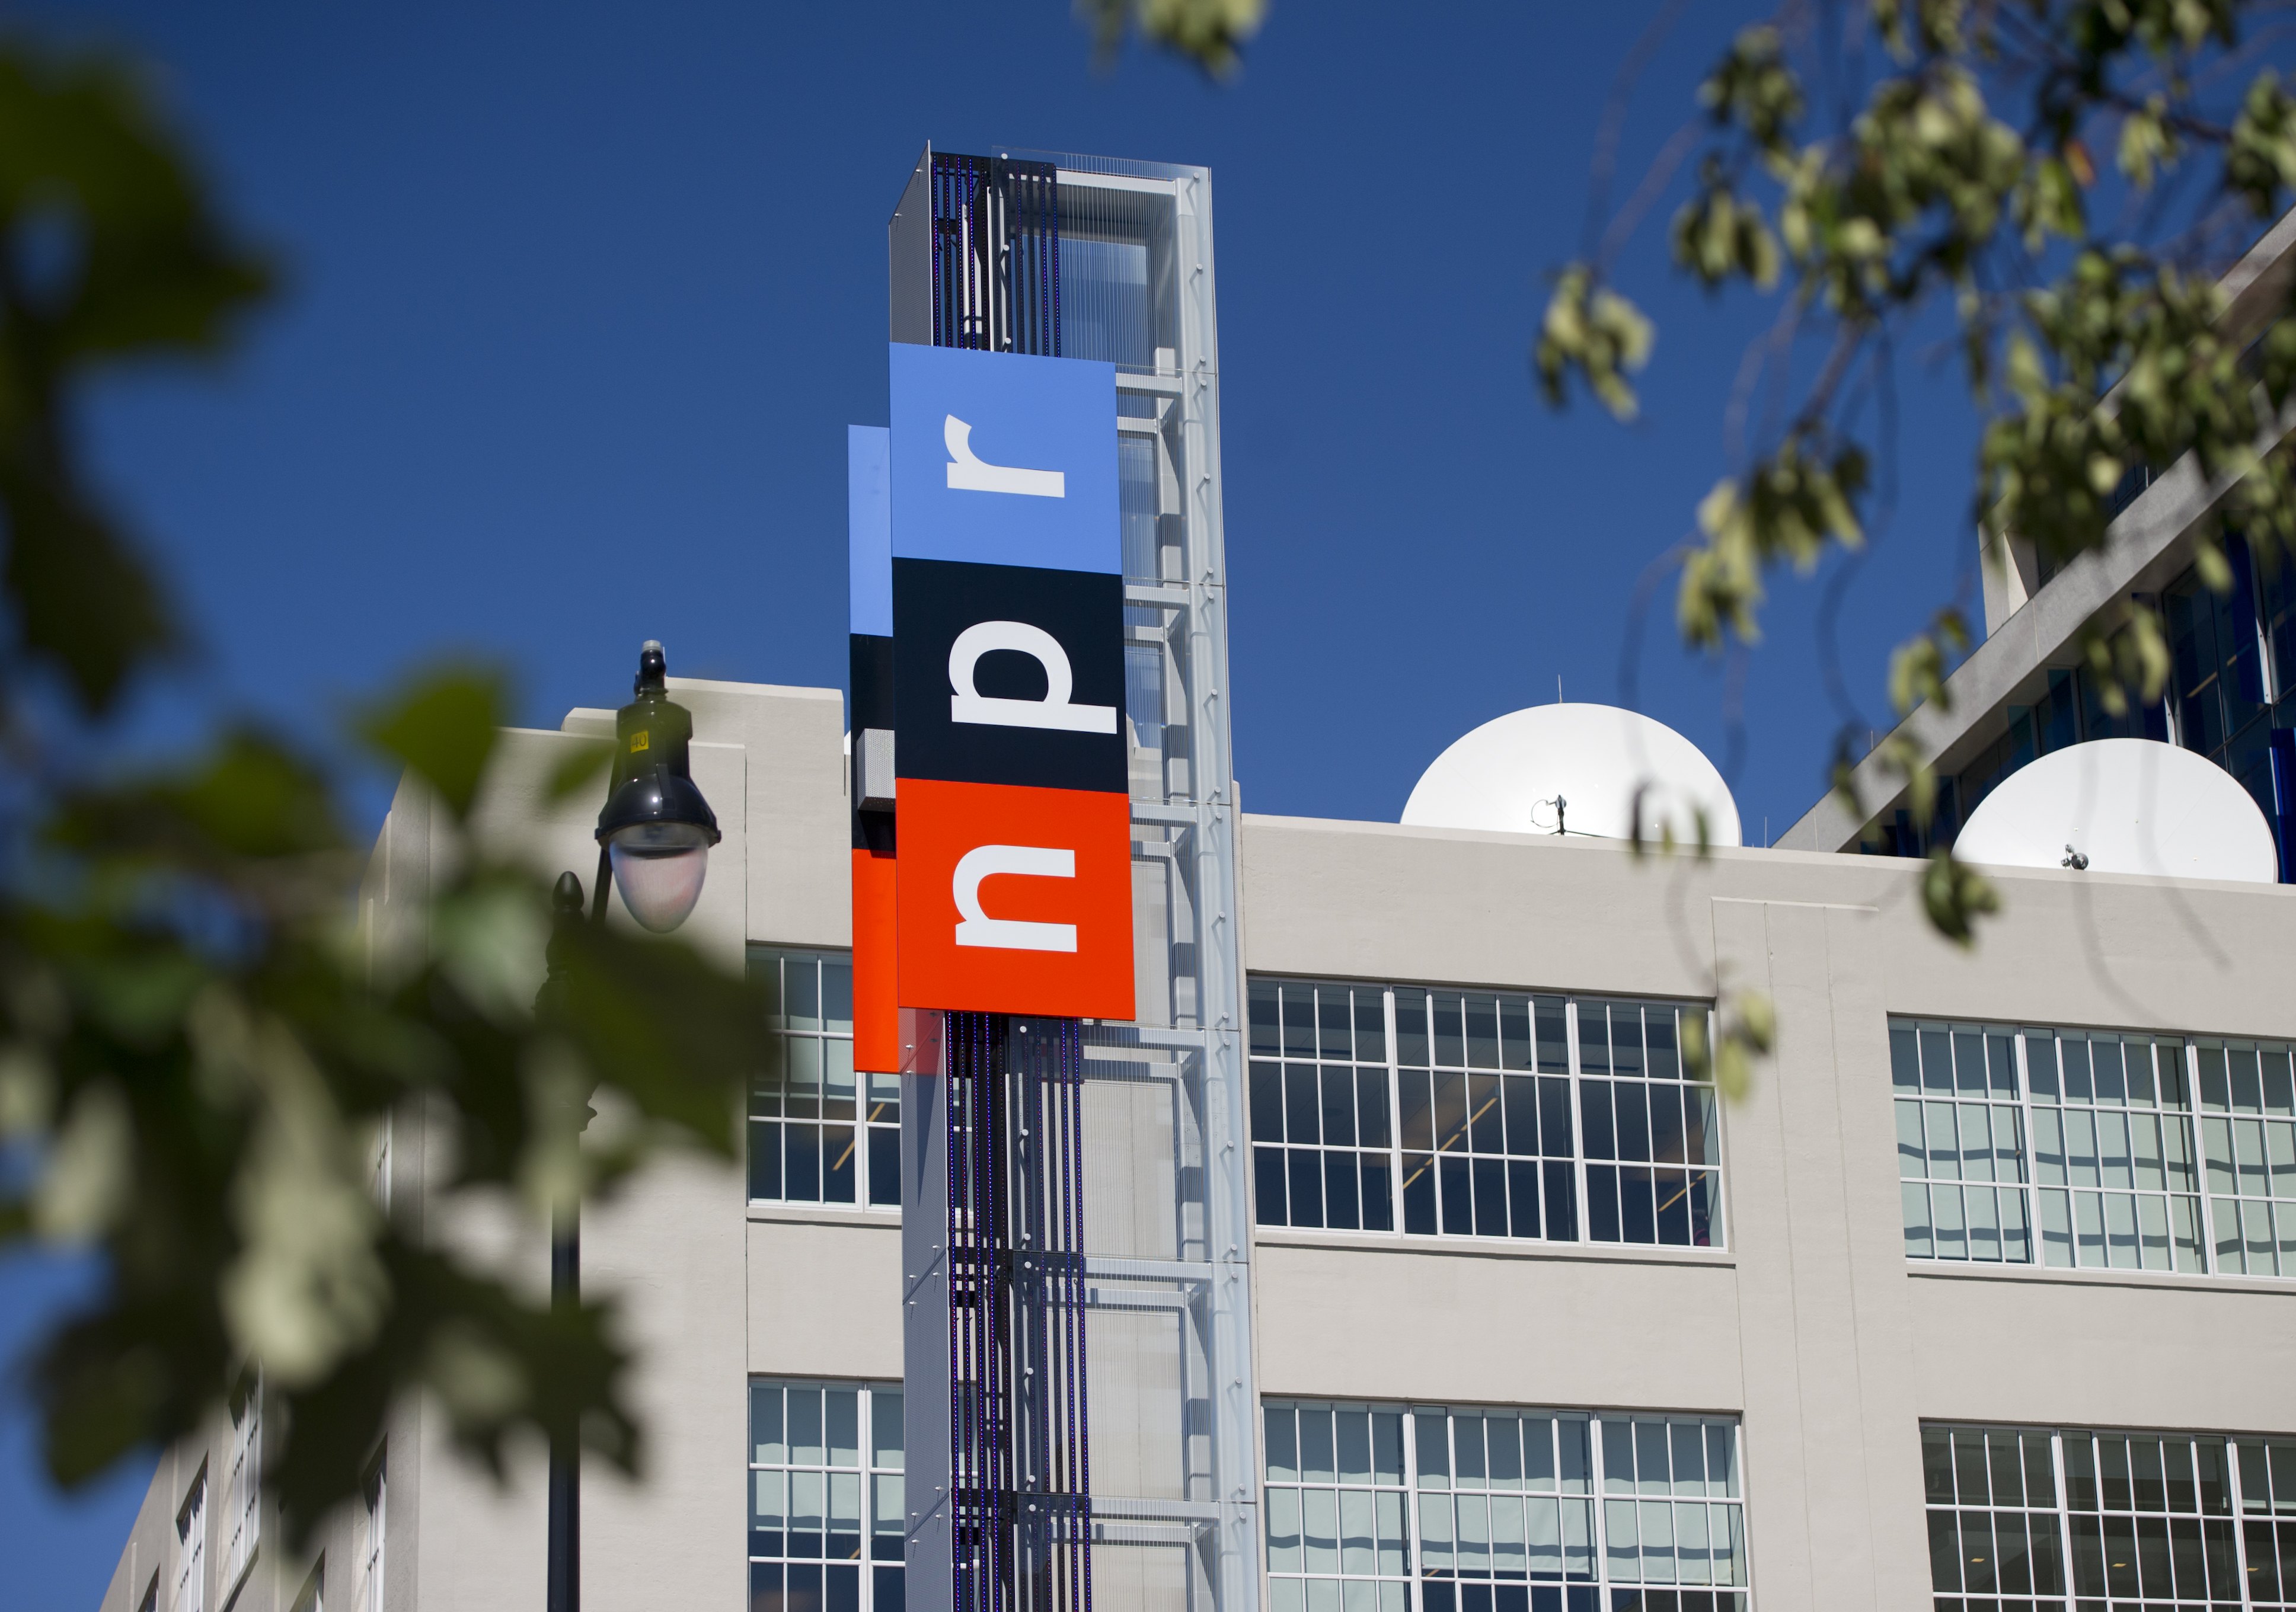 Where Does NPR Get Its Funding From? Calls to Defund Outlet Met With